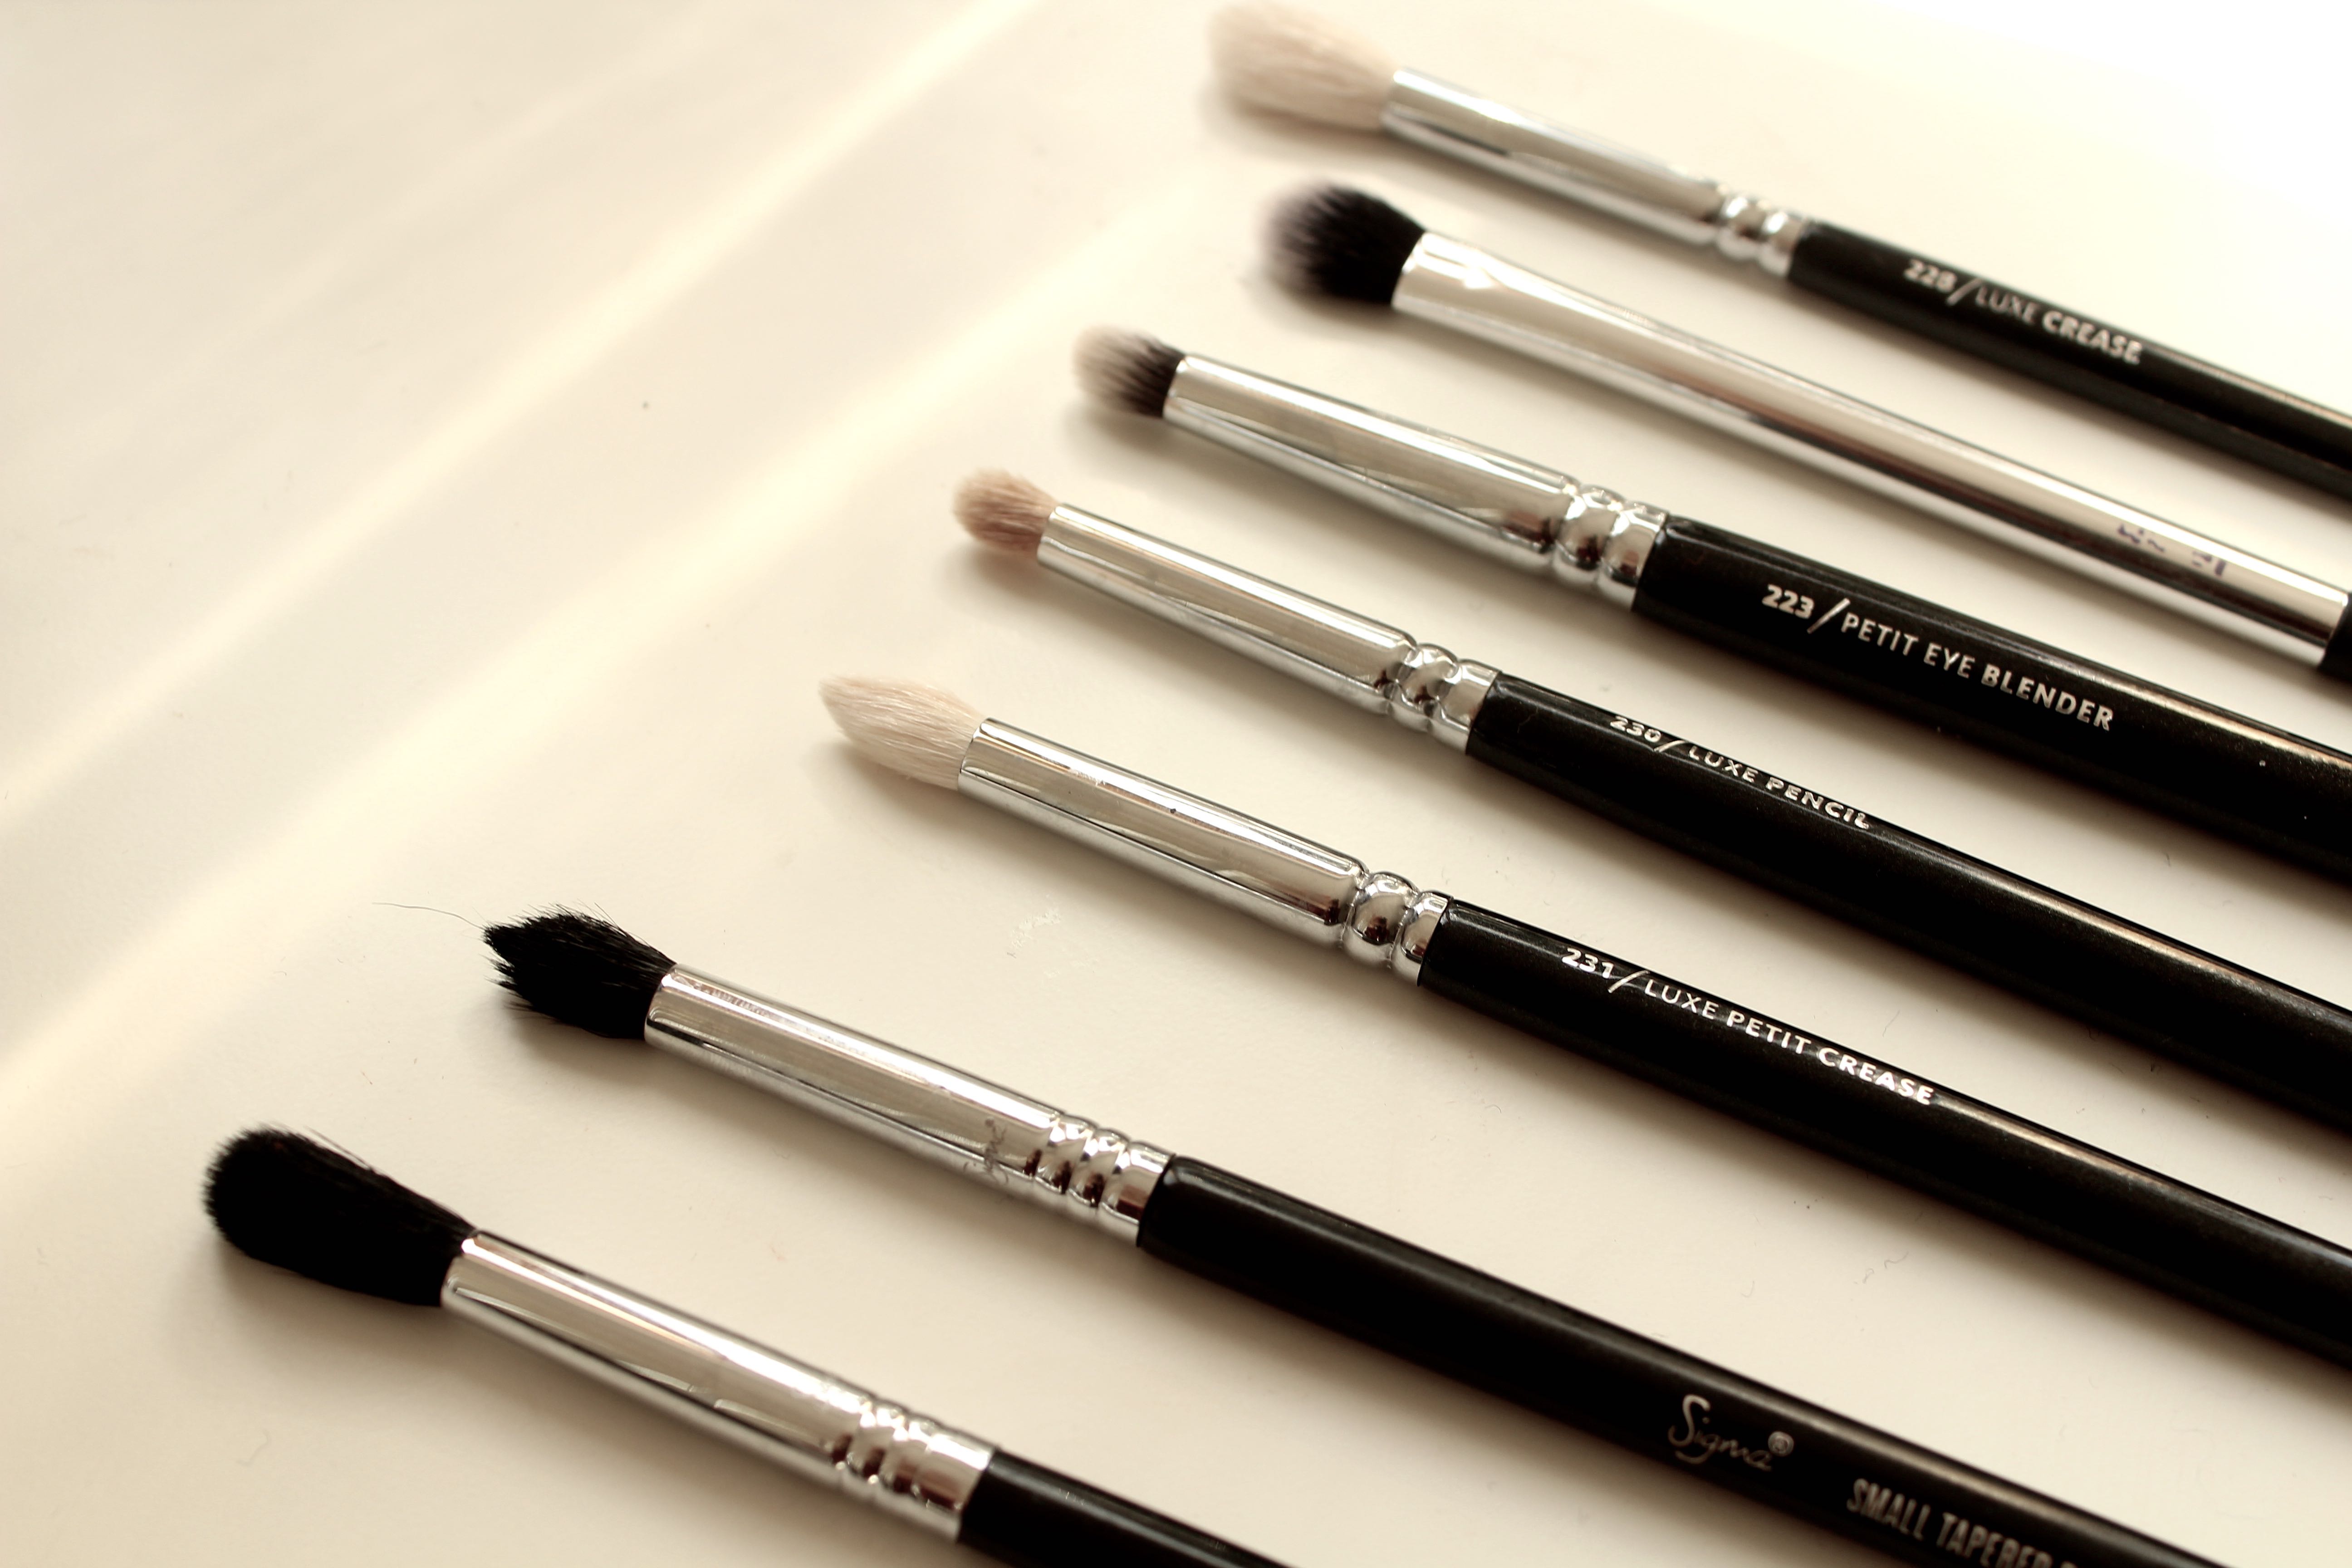 THE BEST 7 MAKEUP BRUSHES FOR SMALLER EYES (GREAT FOR ASIAN/ORIENTAL EYES) by Face Made Up